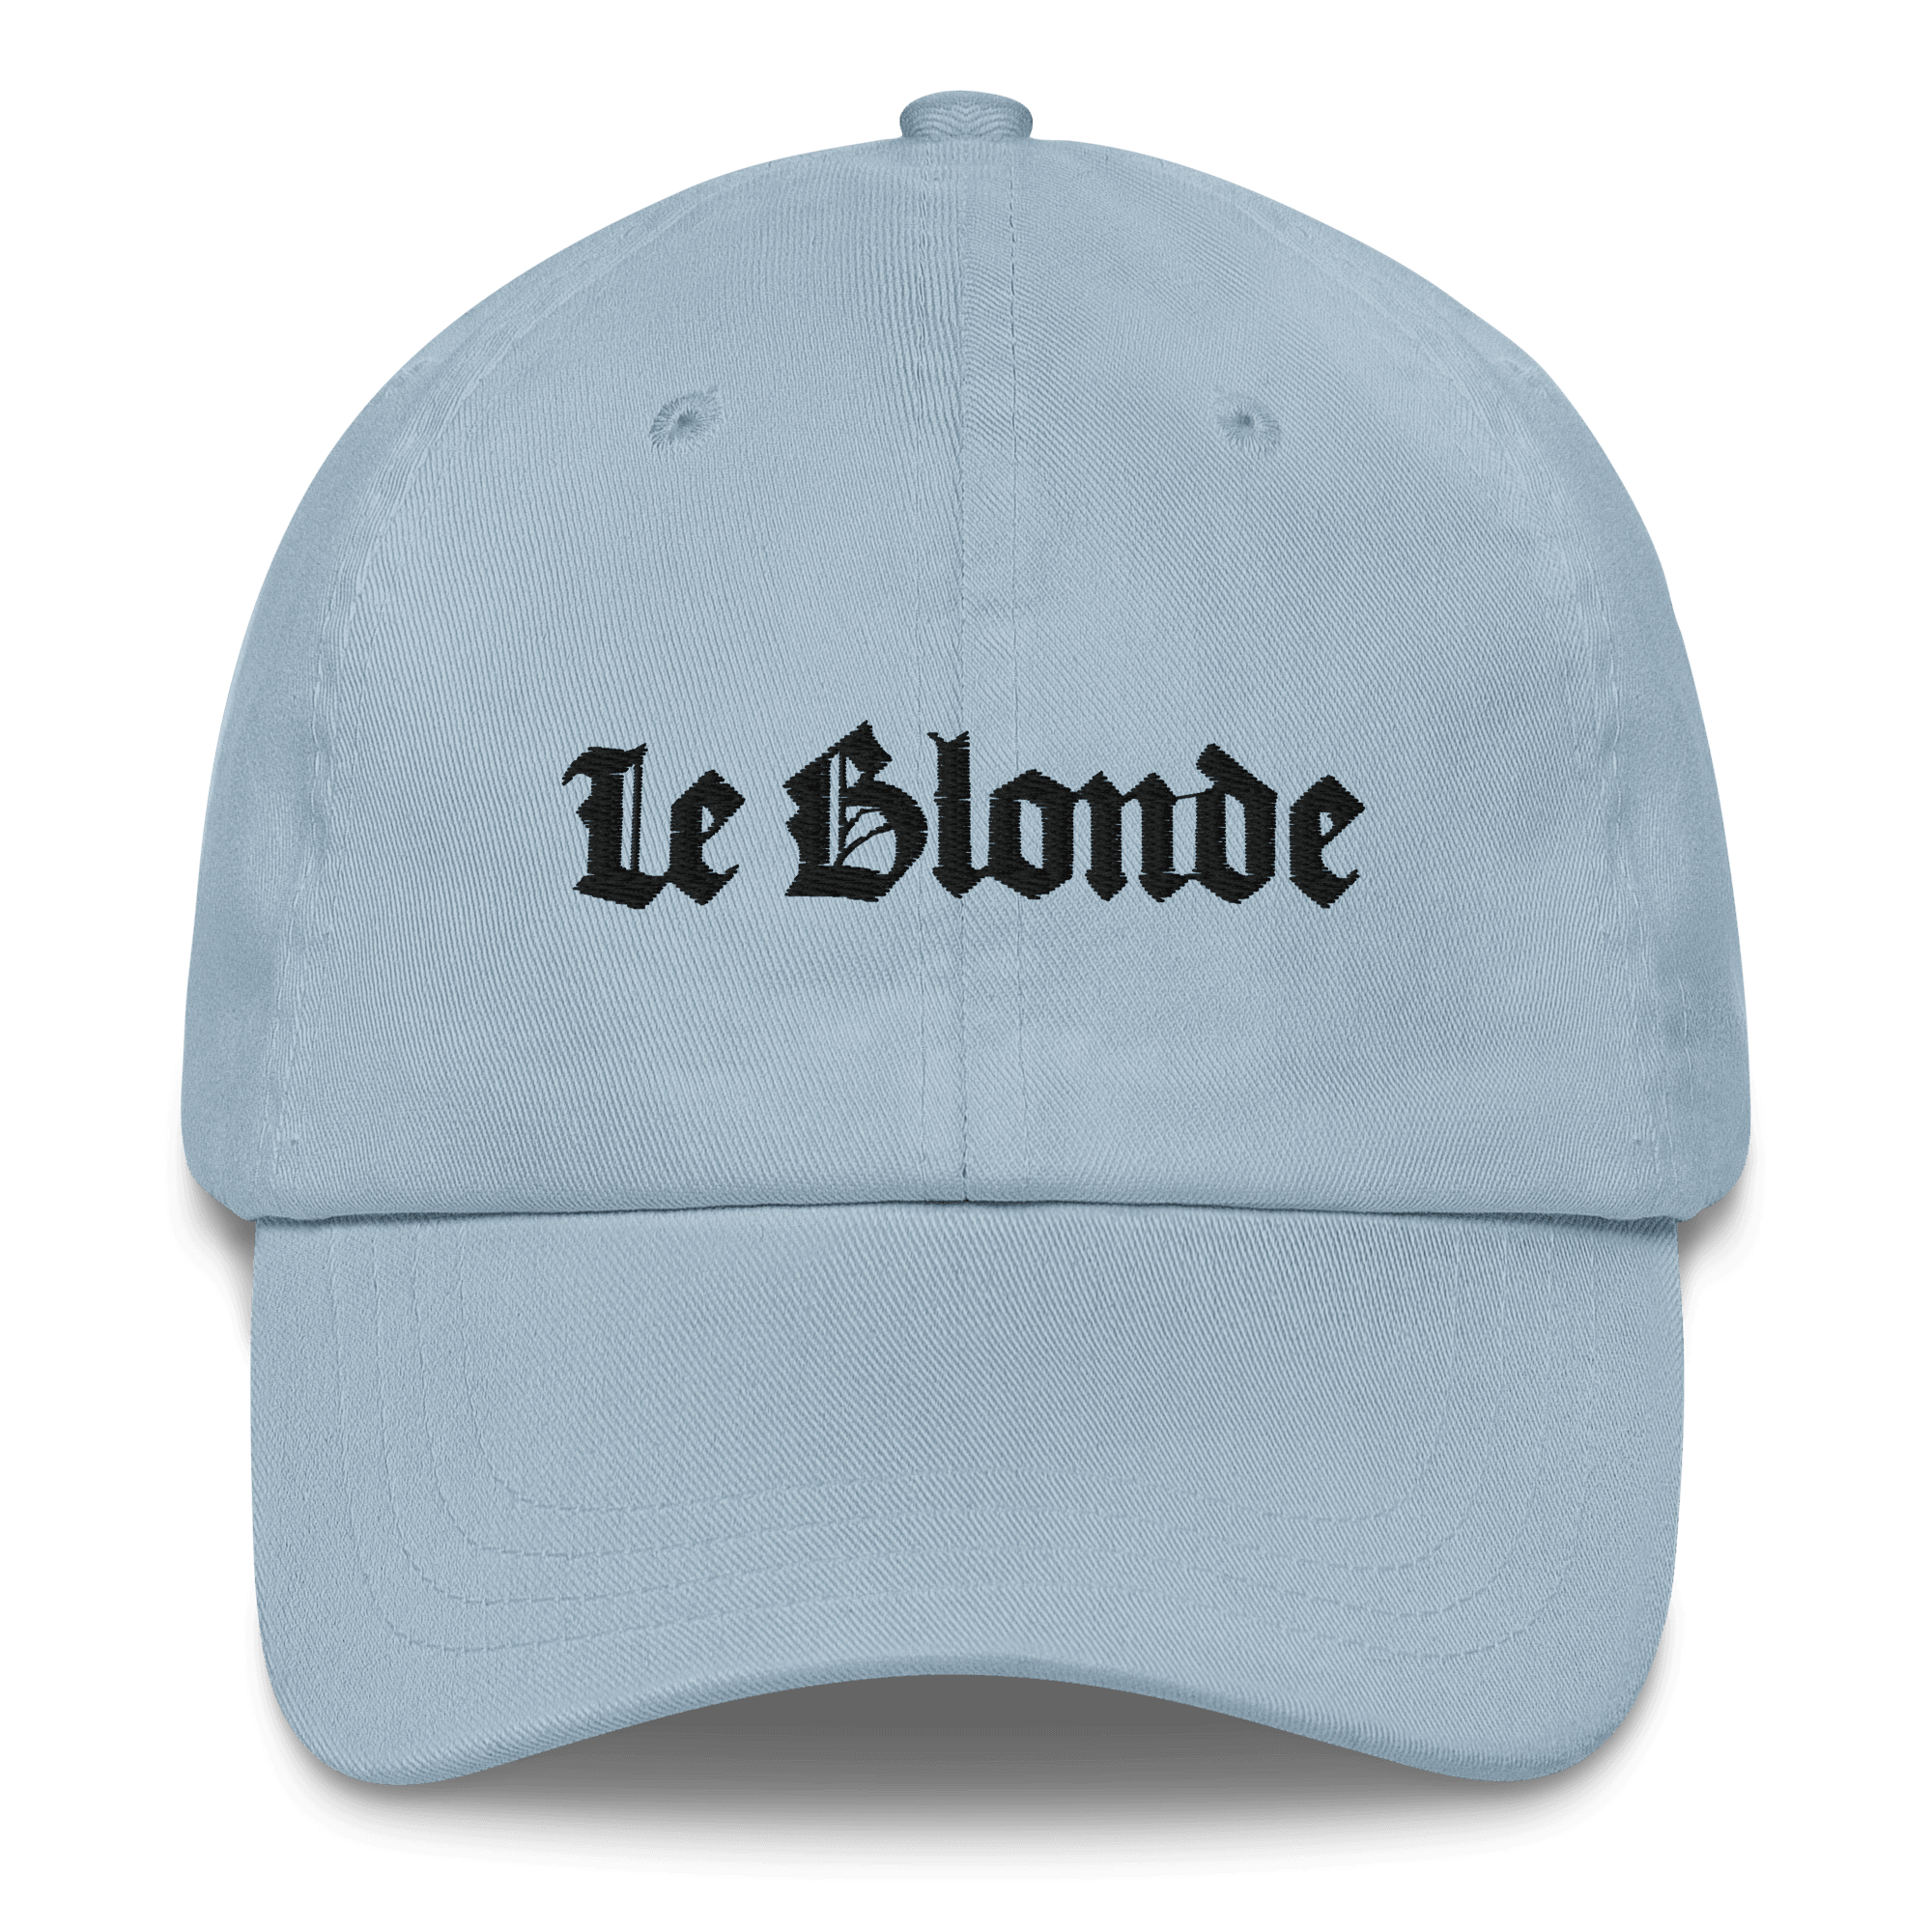 Le Blonde Embroidered Hat - Polychrome Goods 🍊